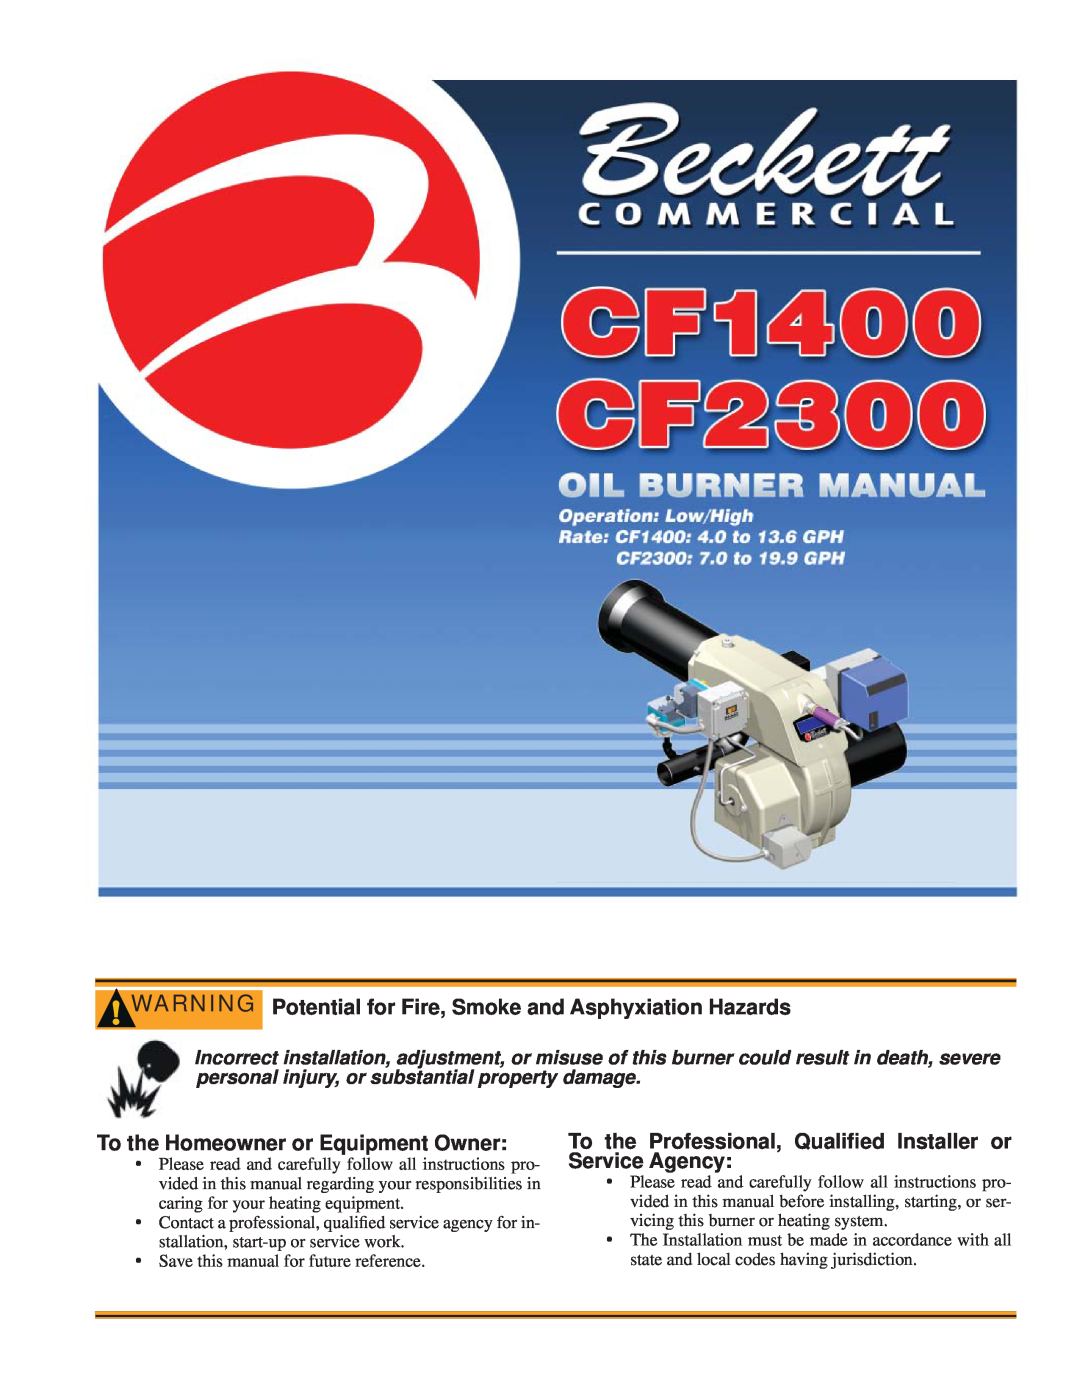 Beckett CF1400, CF2300 manual Potential for Fire, Smoke and Asphyxiation Hazards, To the Homeowner or Equipment Owner 